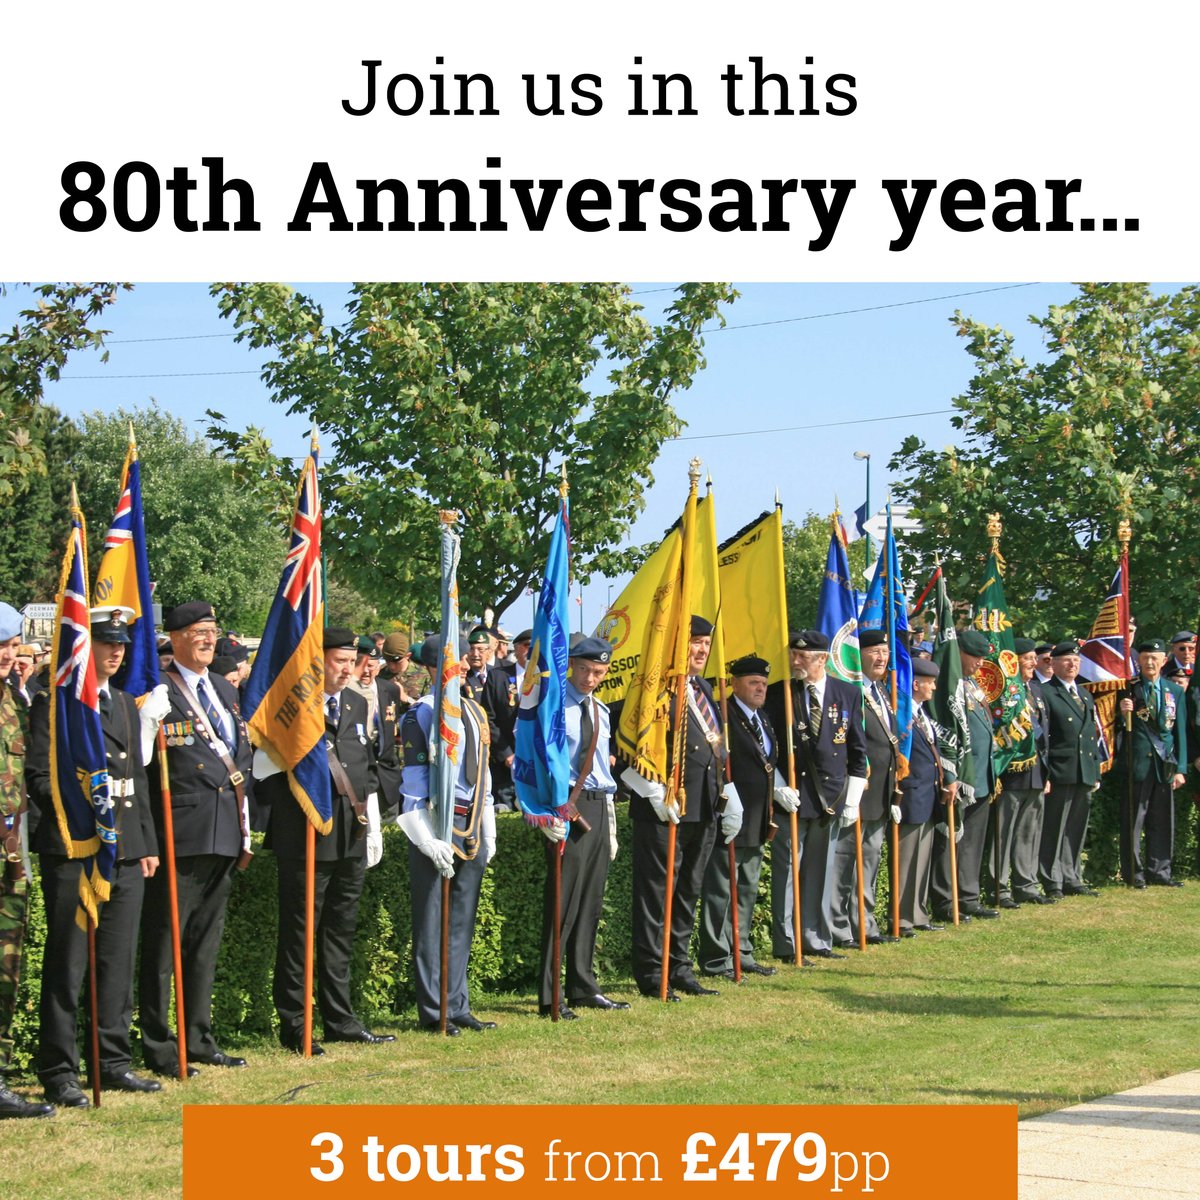 This year marks the 80th Anniversary of several key WW2 operations and campaigns, including the D-Day Landings and Arnhem. So, why not join our Specialist Guides as we travel to the battlefields where history was changed forever? Browse today >> ow.ly/ztpm50QvMWK